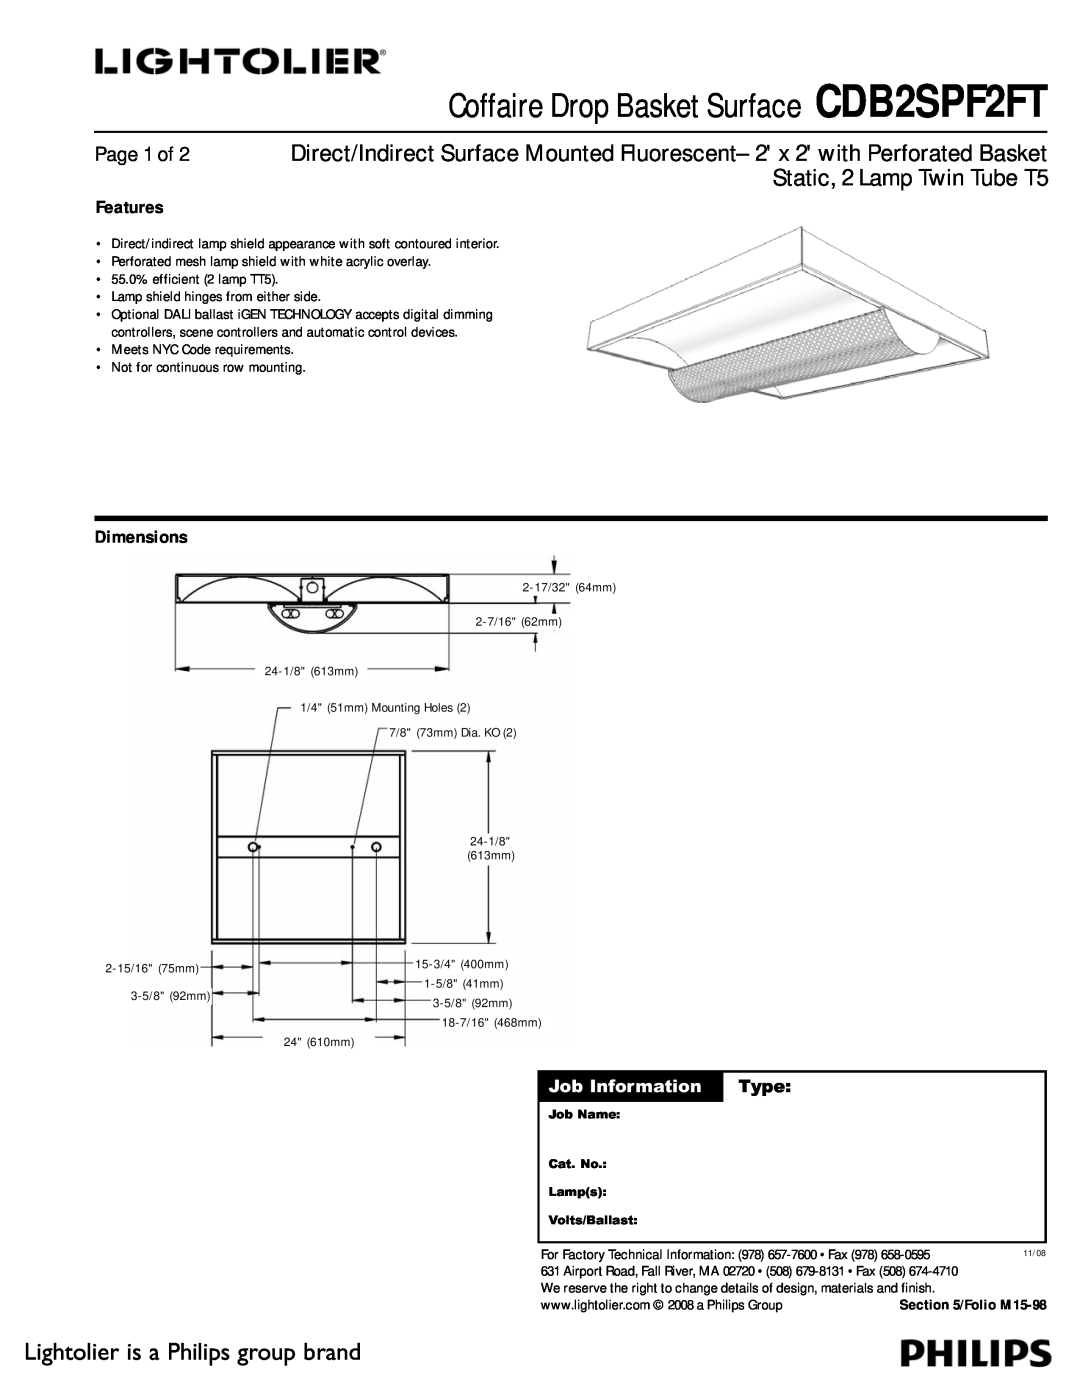 Lightolier dimensions Coffaire Drop Basket Surface CDB2SPF2FT, Static, 2 Lamp Twin Tube T5, Page 1 of, Features, Type 